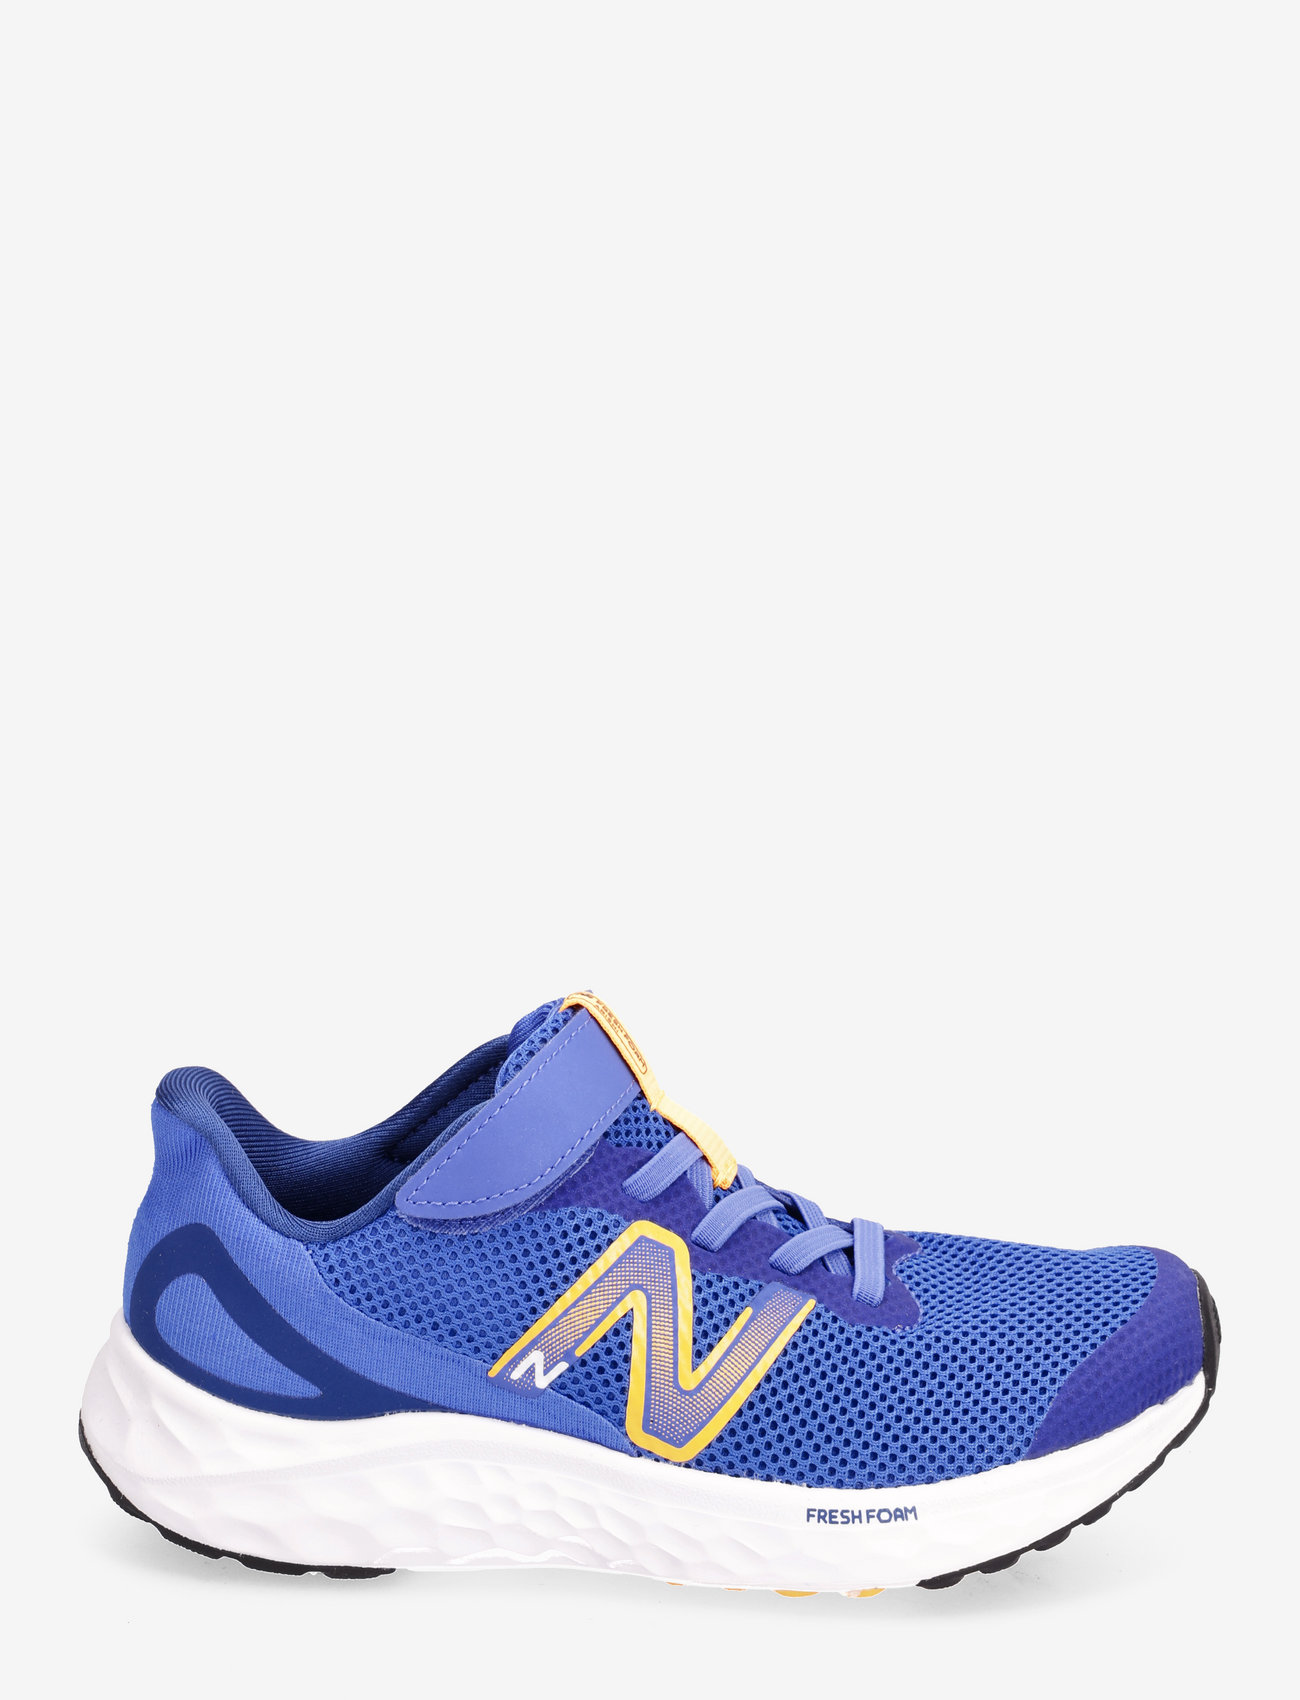 New Balance - Fresh Foam Arishi v4 Bungee Lace with Hook and Loop Top Stra - kinder - marine blue - 1